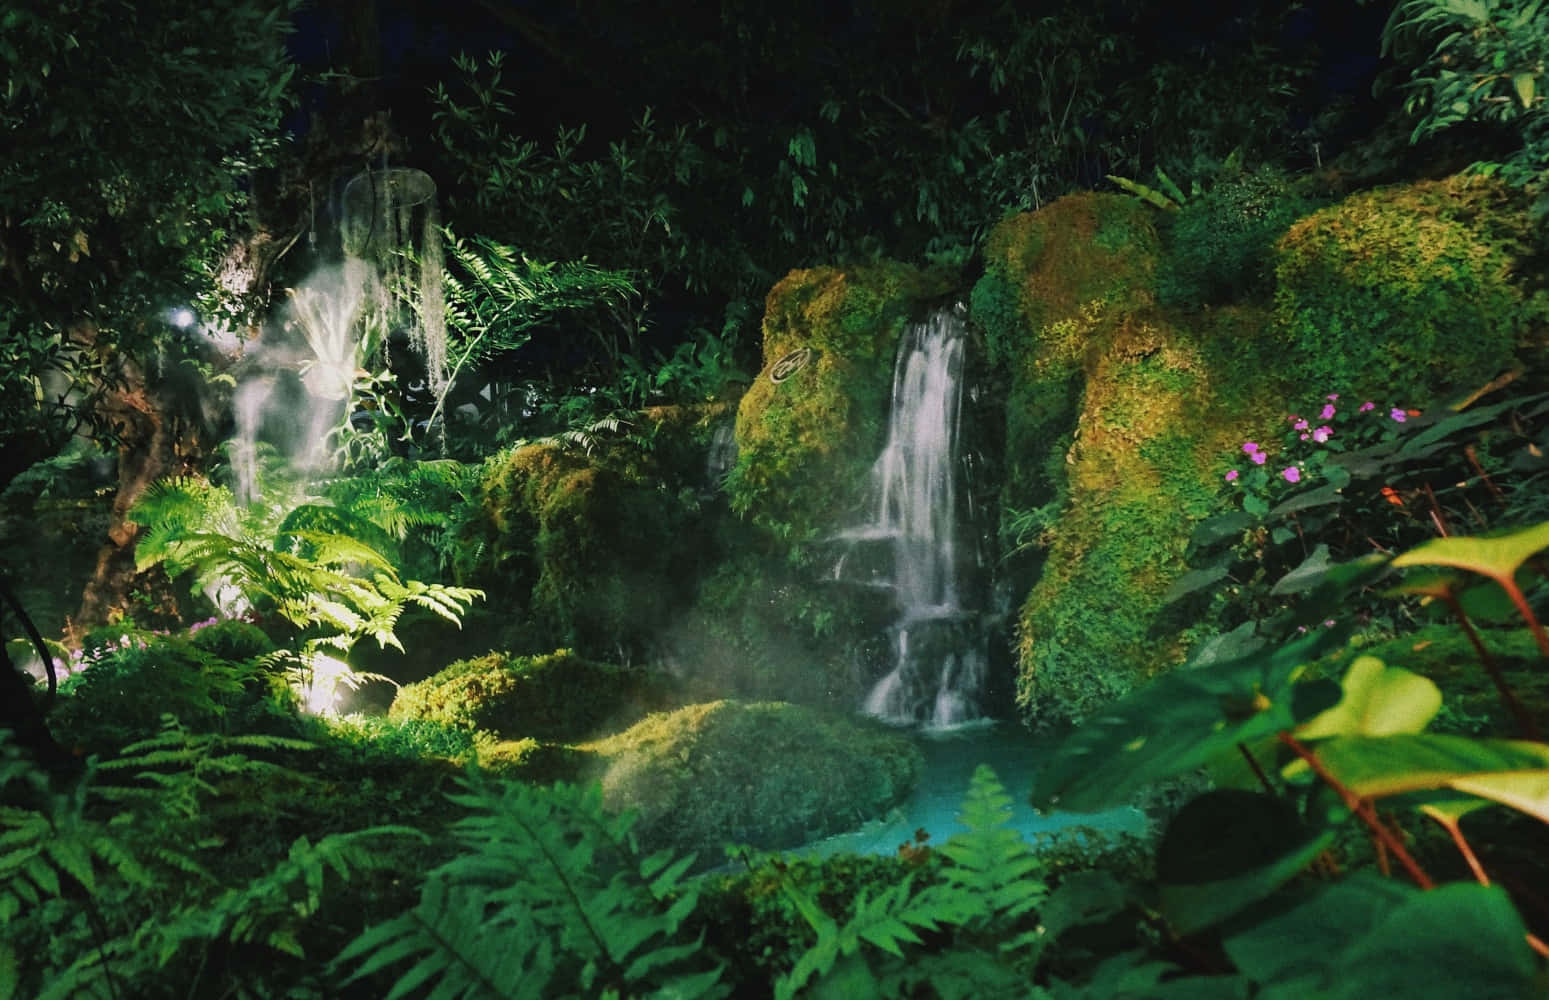 A Waterfall In A Tropical Garden At Night